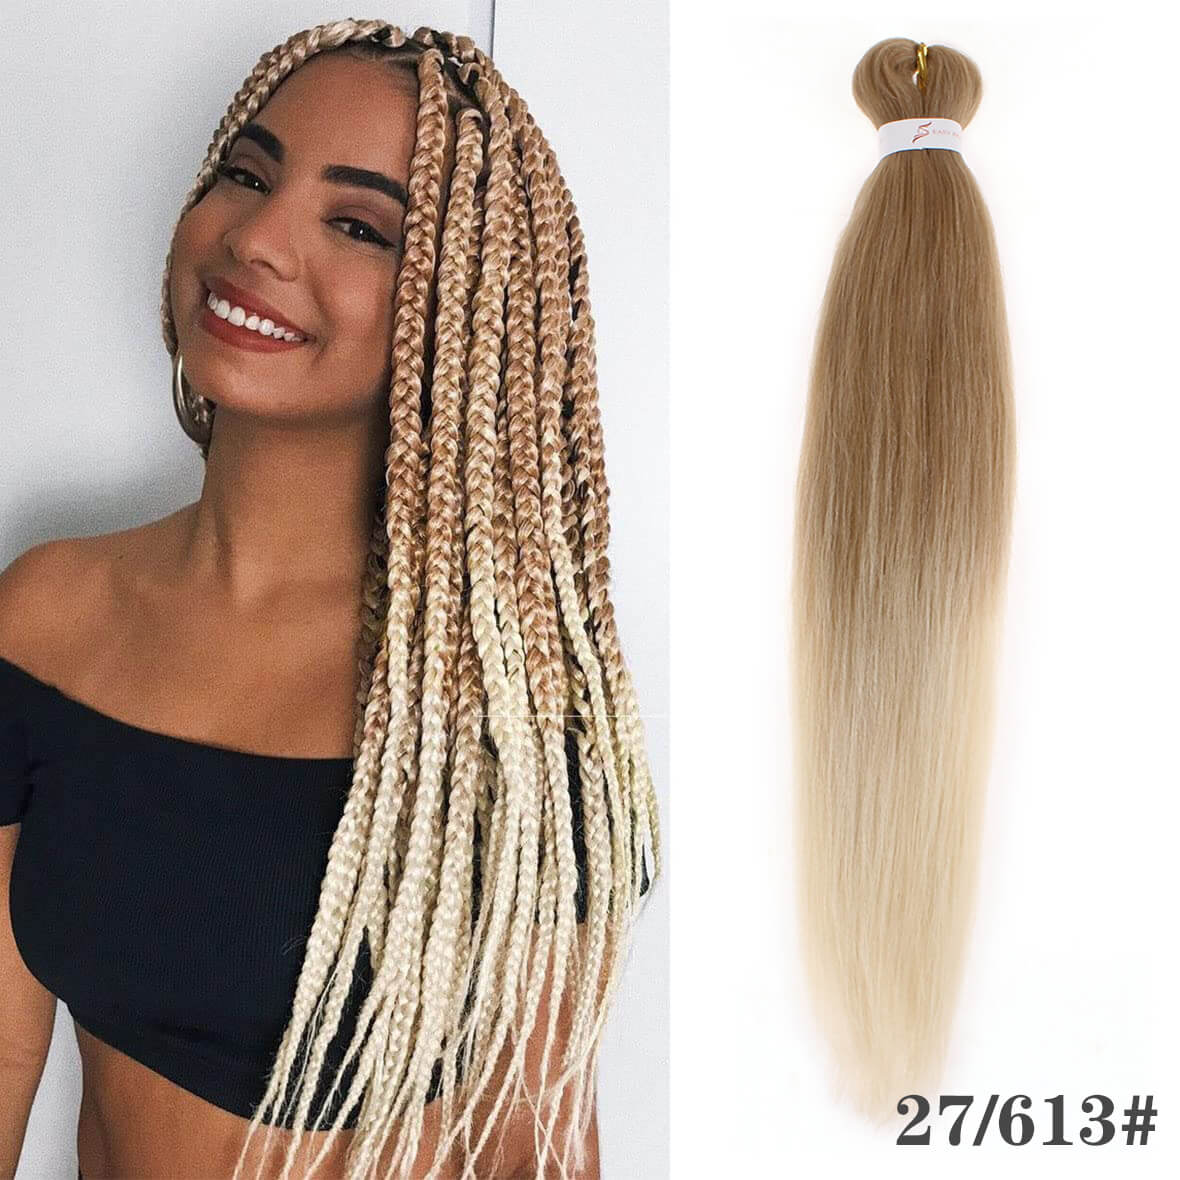  Green Braiding Hair Pre Stretched 30 Inch 3 Packs Kanekalon  Pre-stretched Braiding Hair EZ Braid Yaki Texture Synthetic Hair Extensions  For Crochet Box Braids